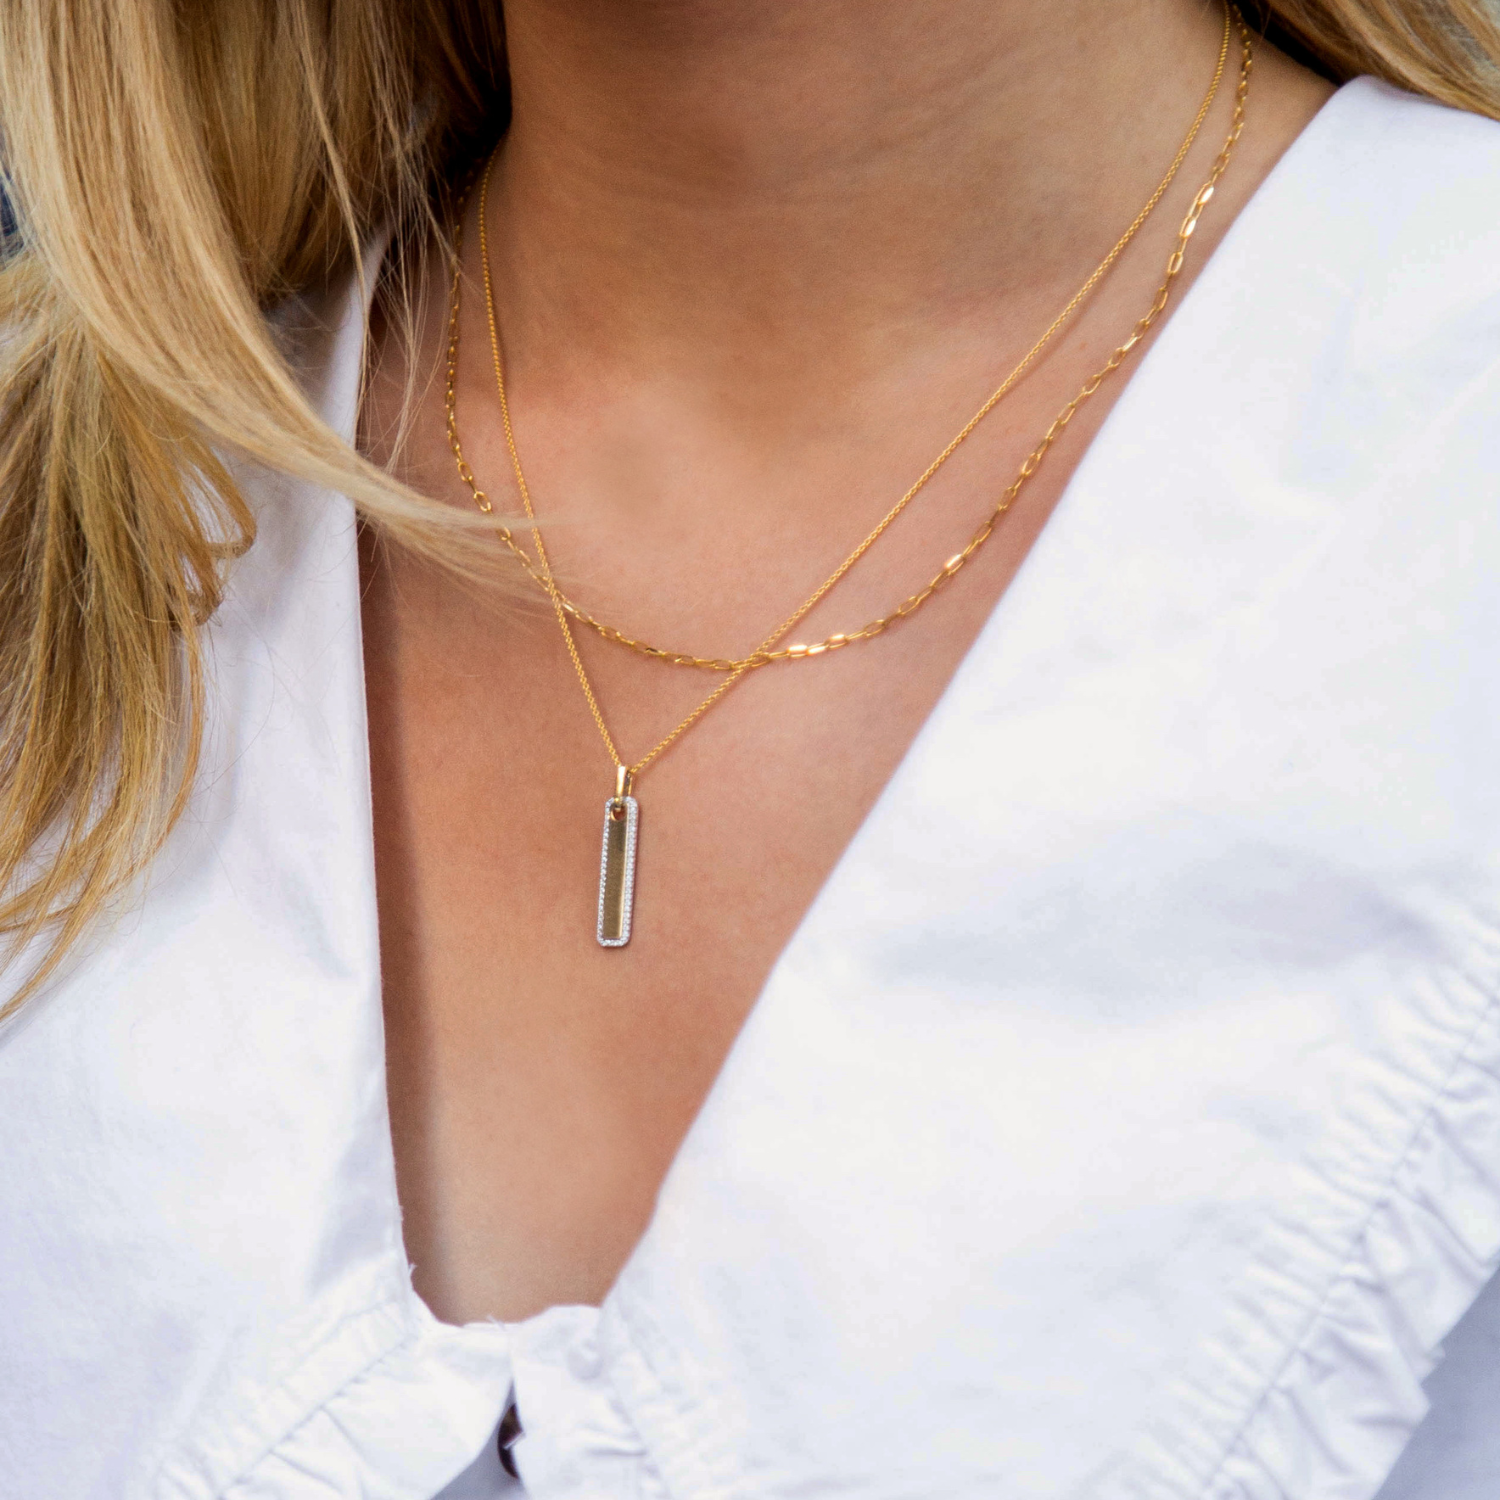 Midi Paperclip Chain Necklace In Lady's Neck with Gold Chain